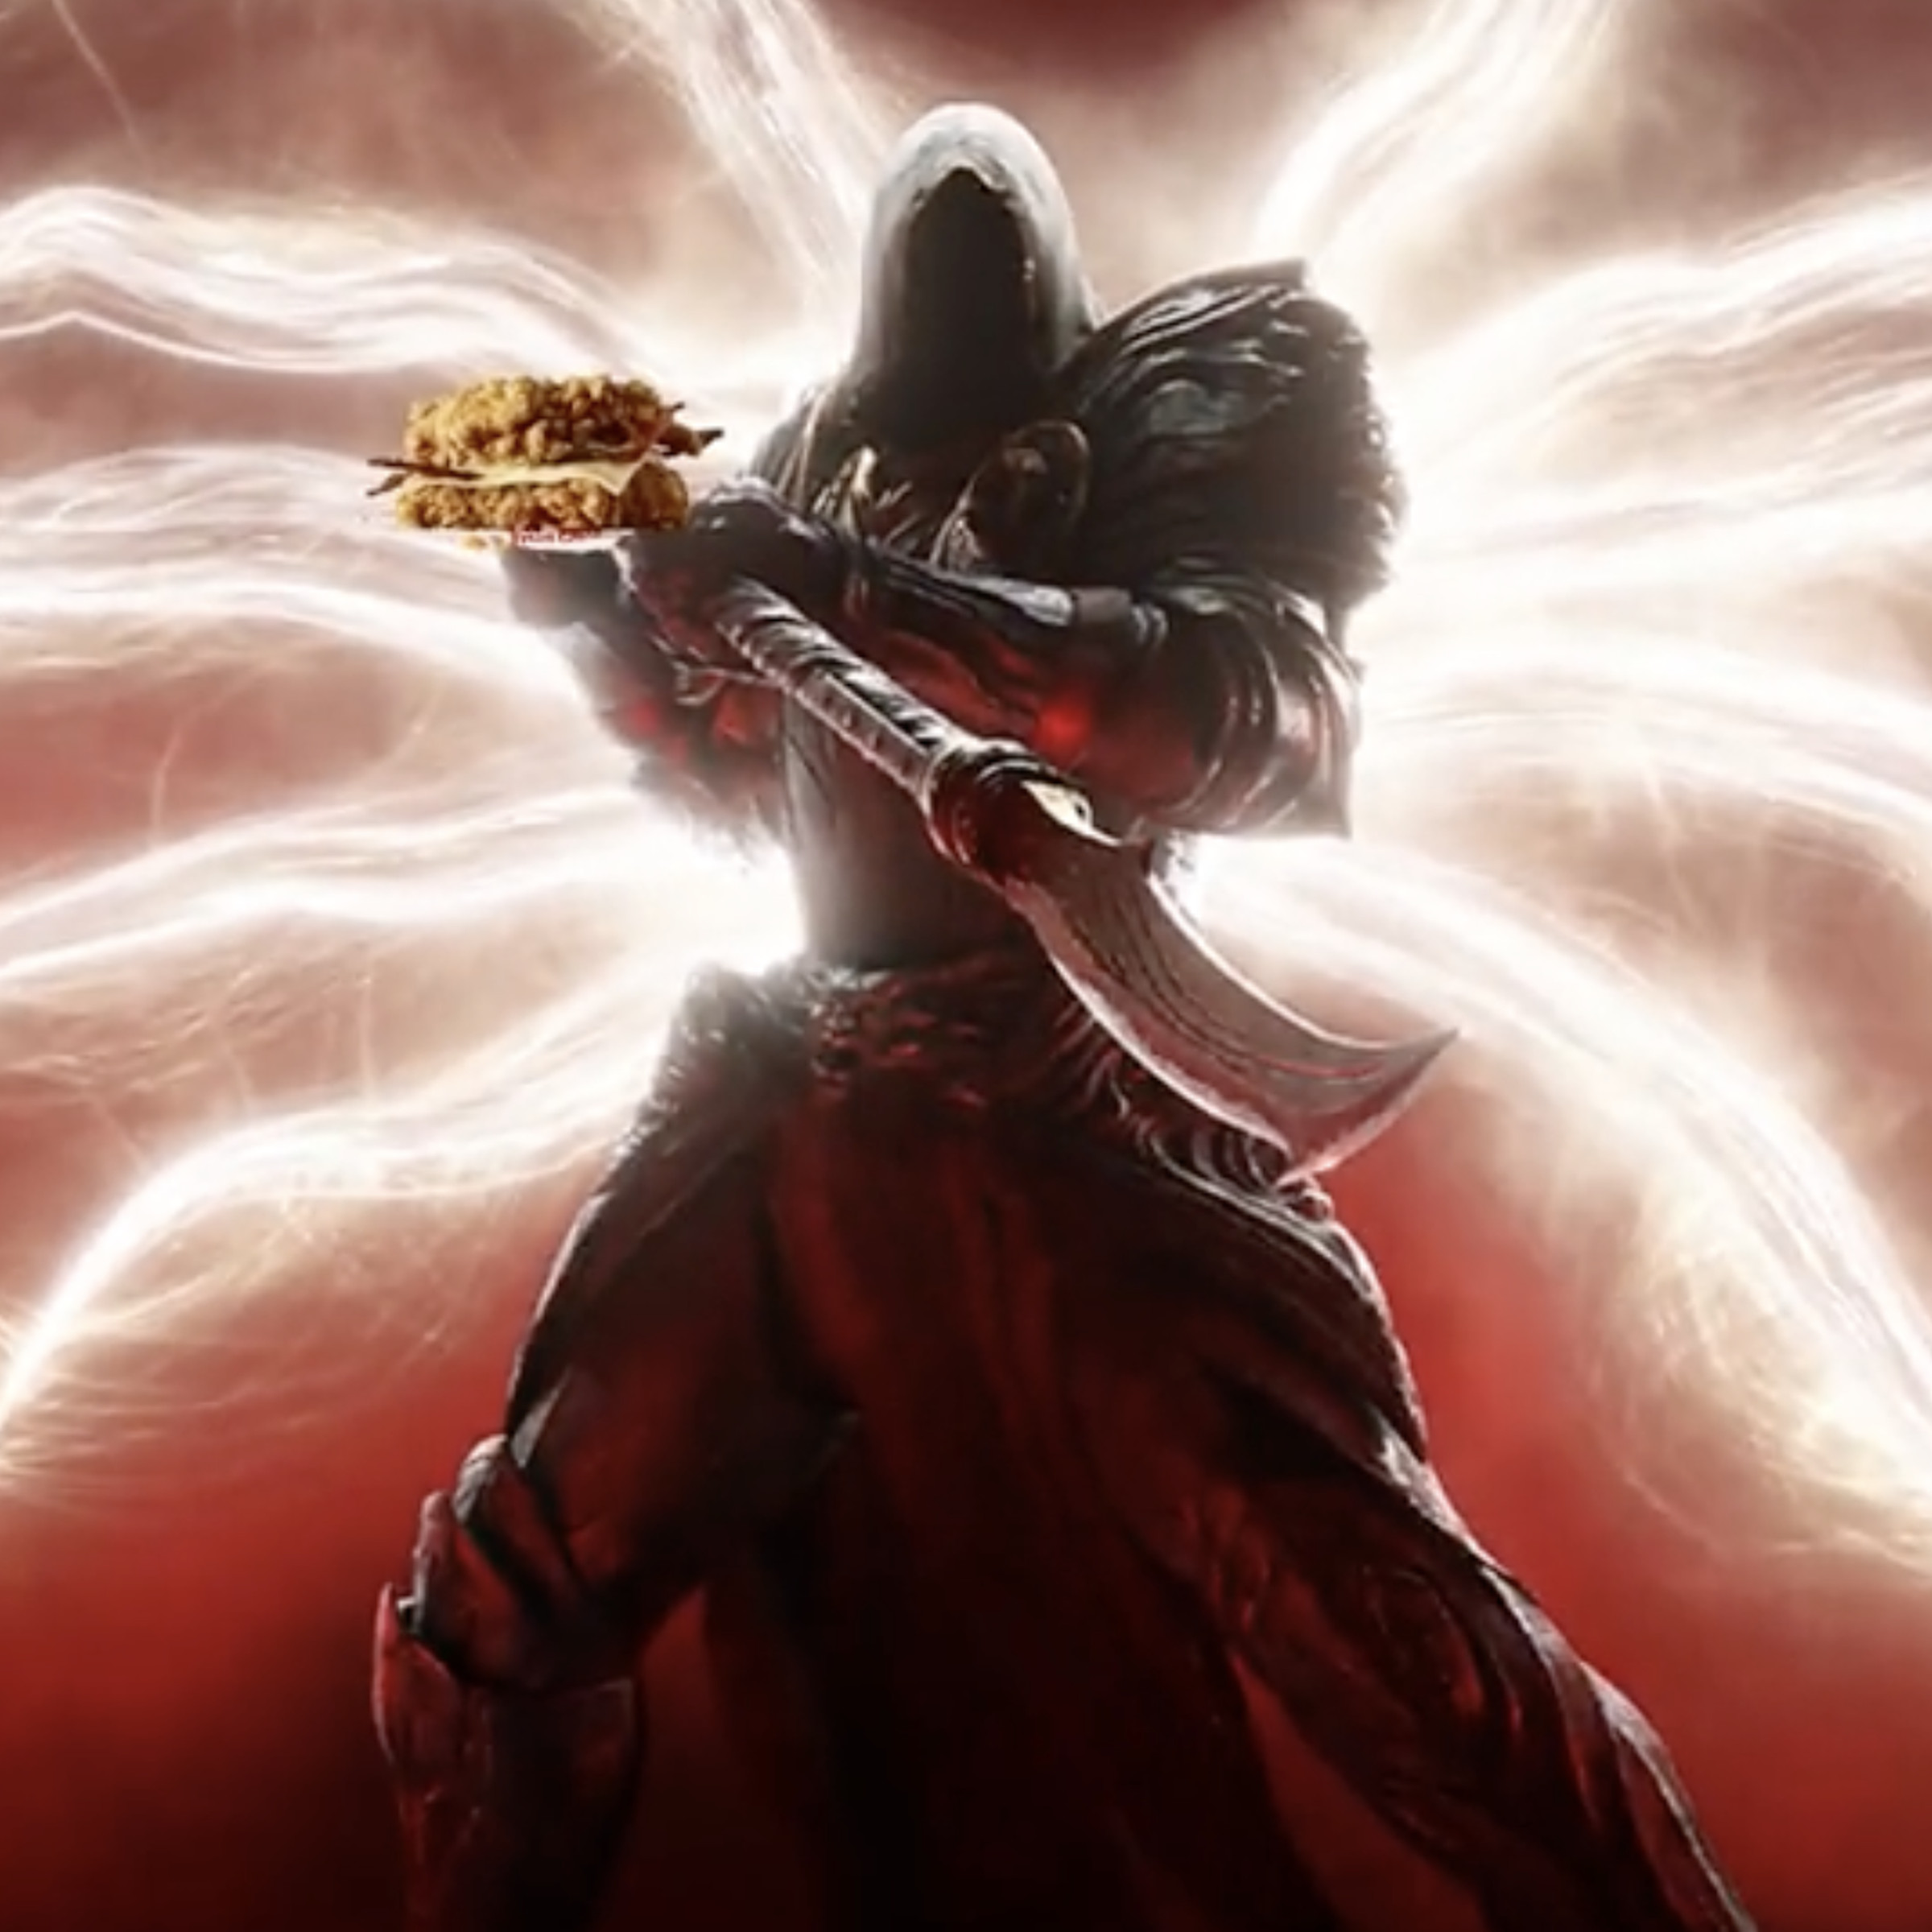 Image from a KFC promotional tweet featuring a Diablo IV character holding a KFC Double Down sandwich